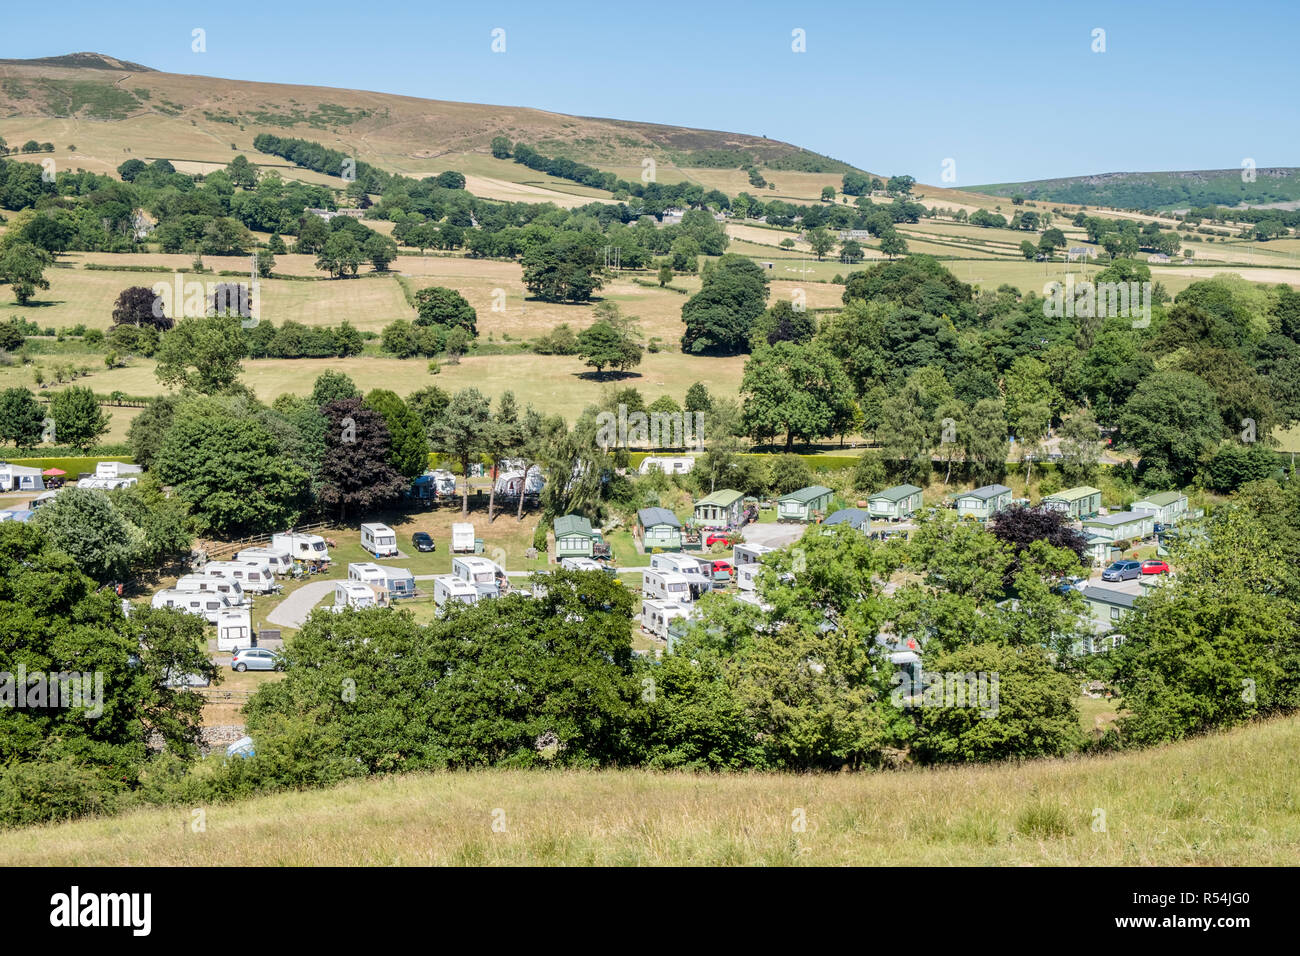 Caravans at a caravan park at the foot of Win Hill in the countryside near Hope, Derbyshire, Peak District National Park, England, UK Stock Photo